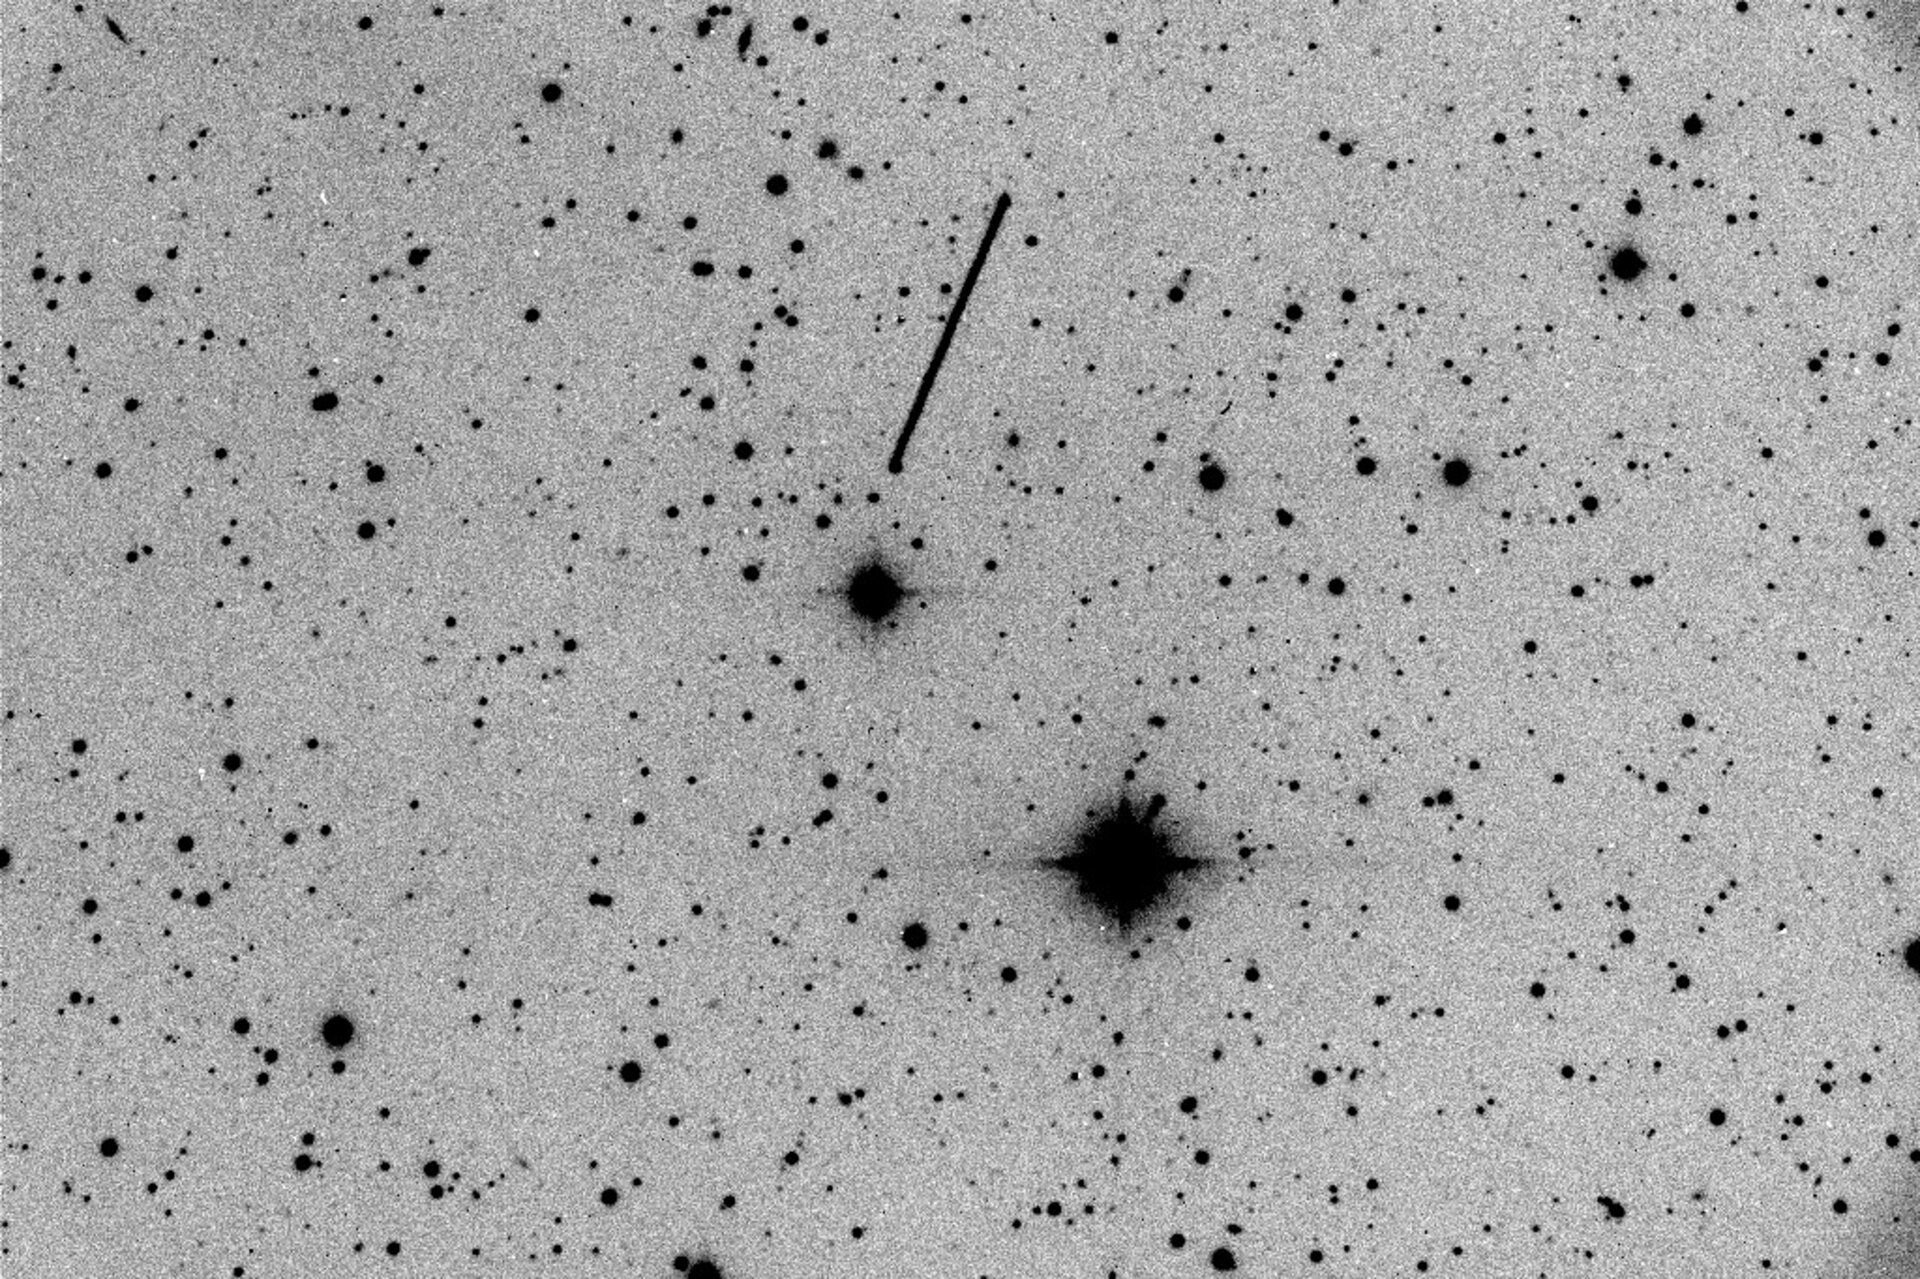 Asteroid 2012 DA14 seven hours before closest approach